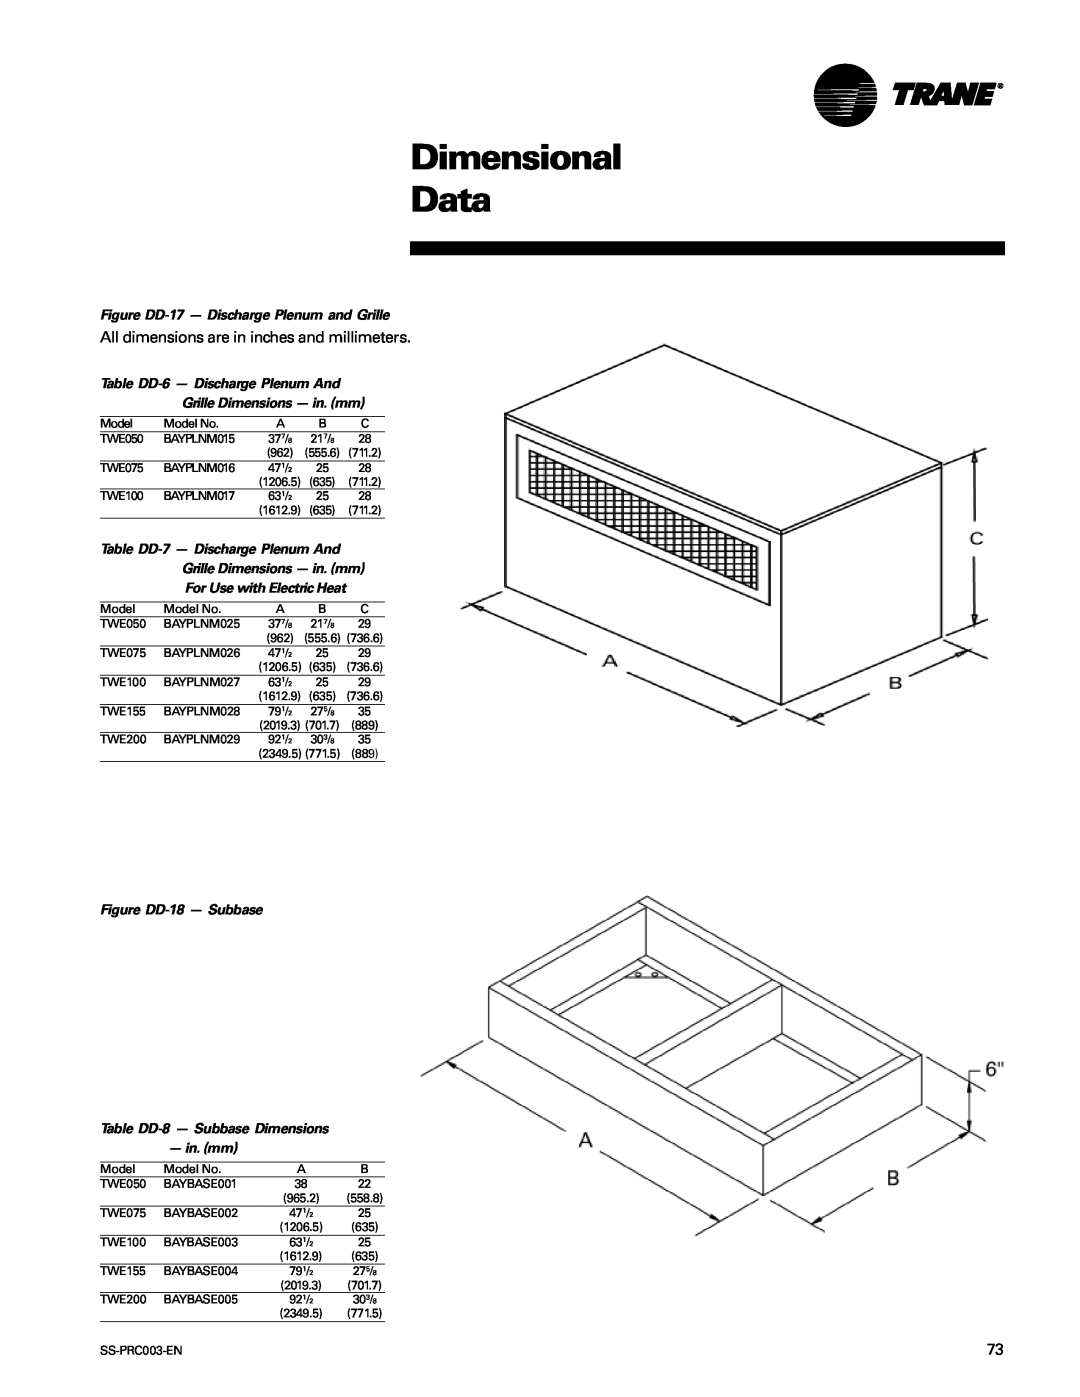 Trane SS-PRC003-EN manual Dimensional Data, All dimensions are in inches and millimeters, Table DD-6- Discharge Plenum And 